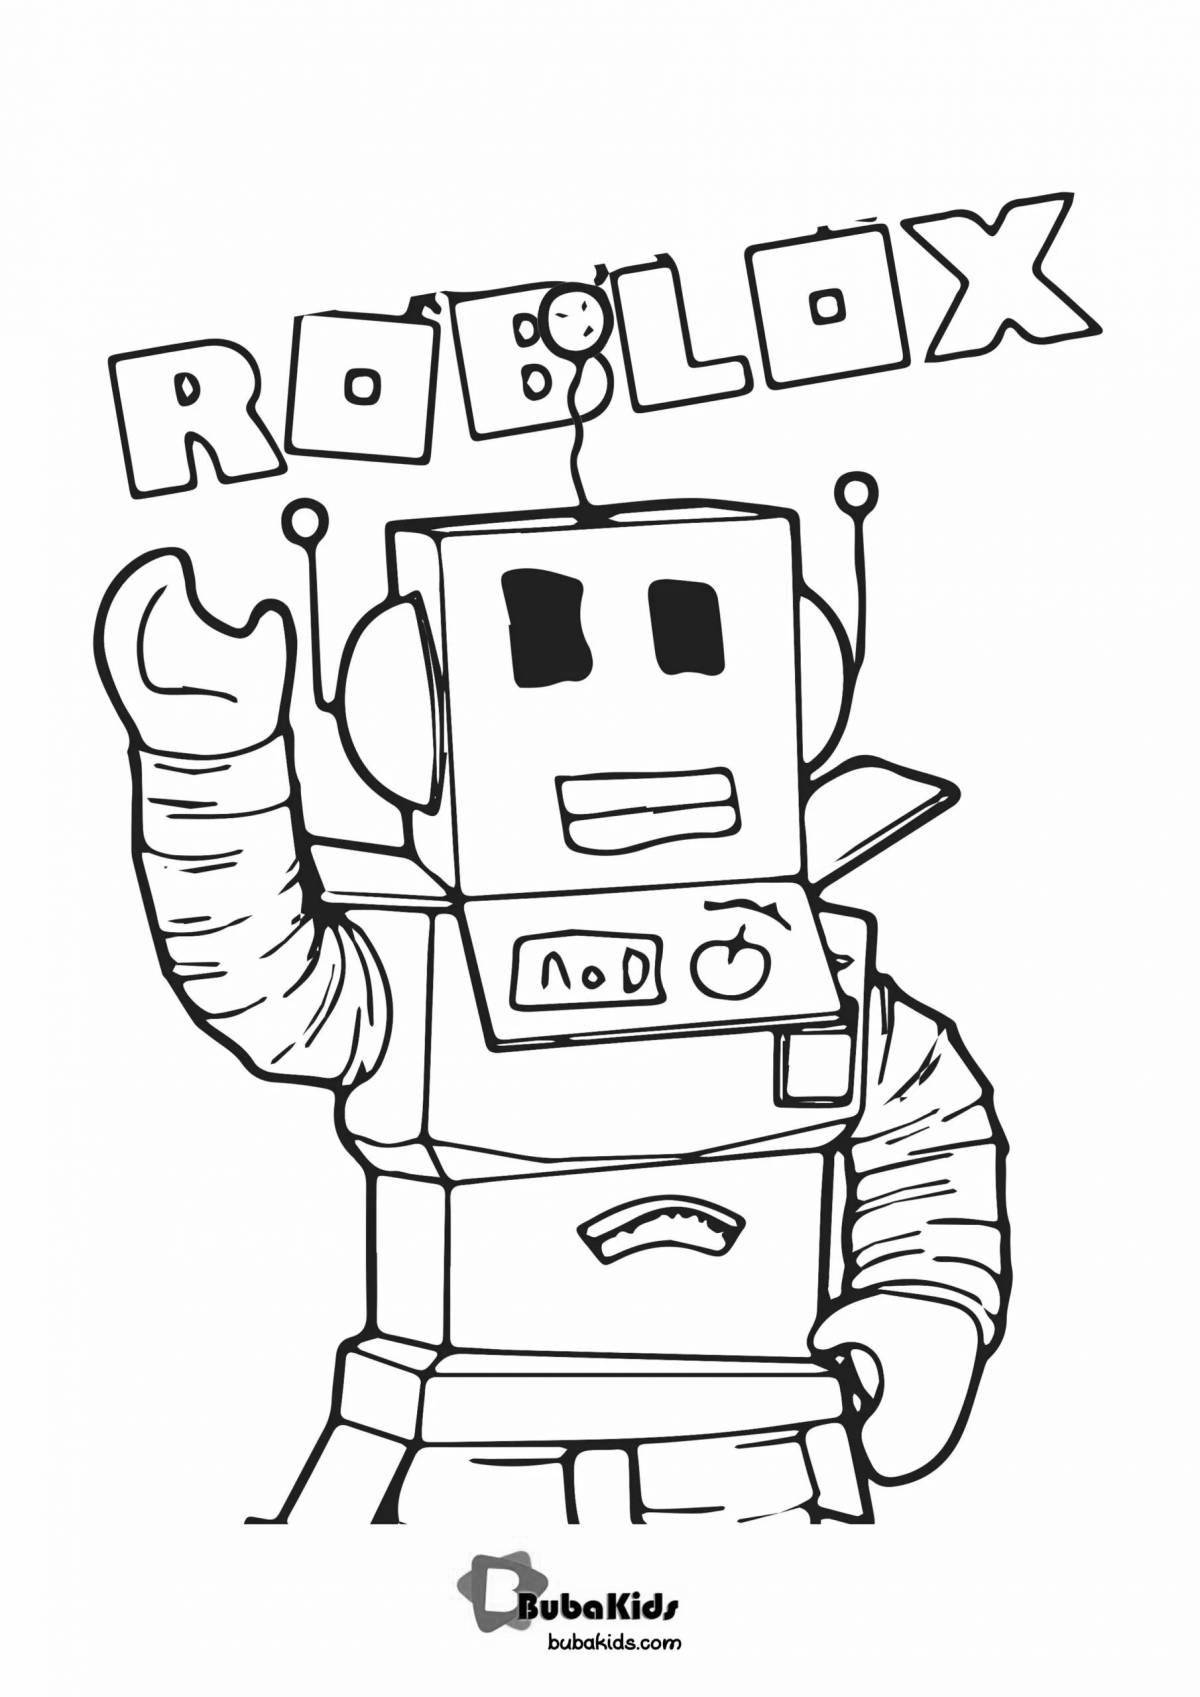 Innovative roblox art coloring page